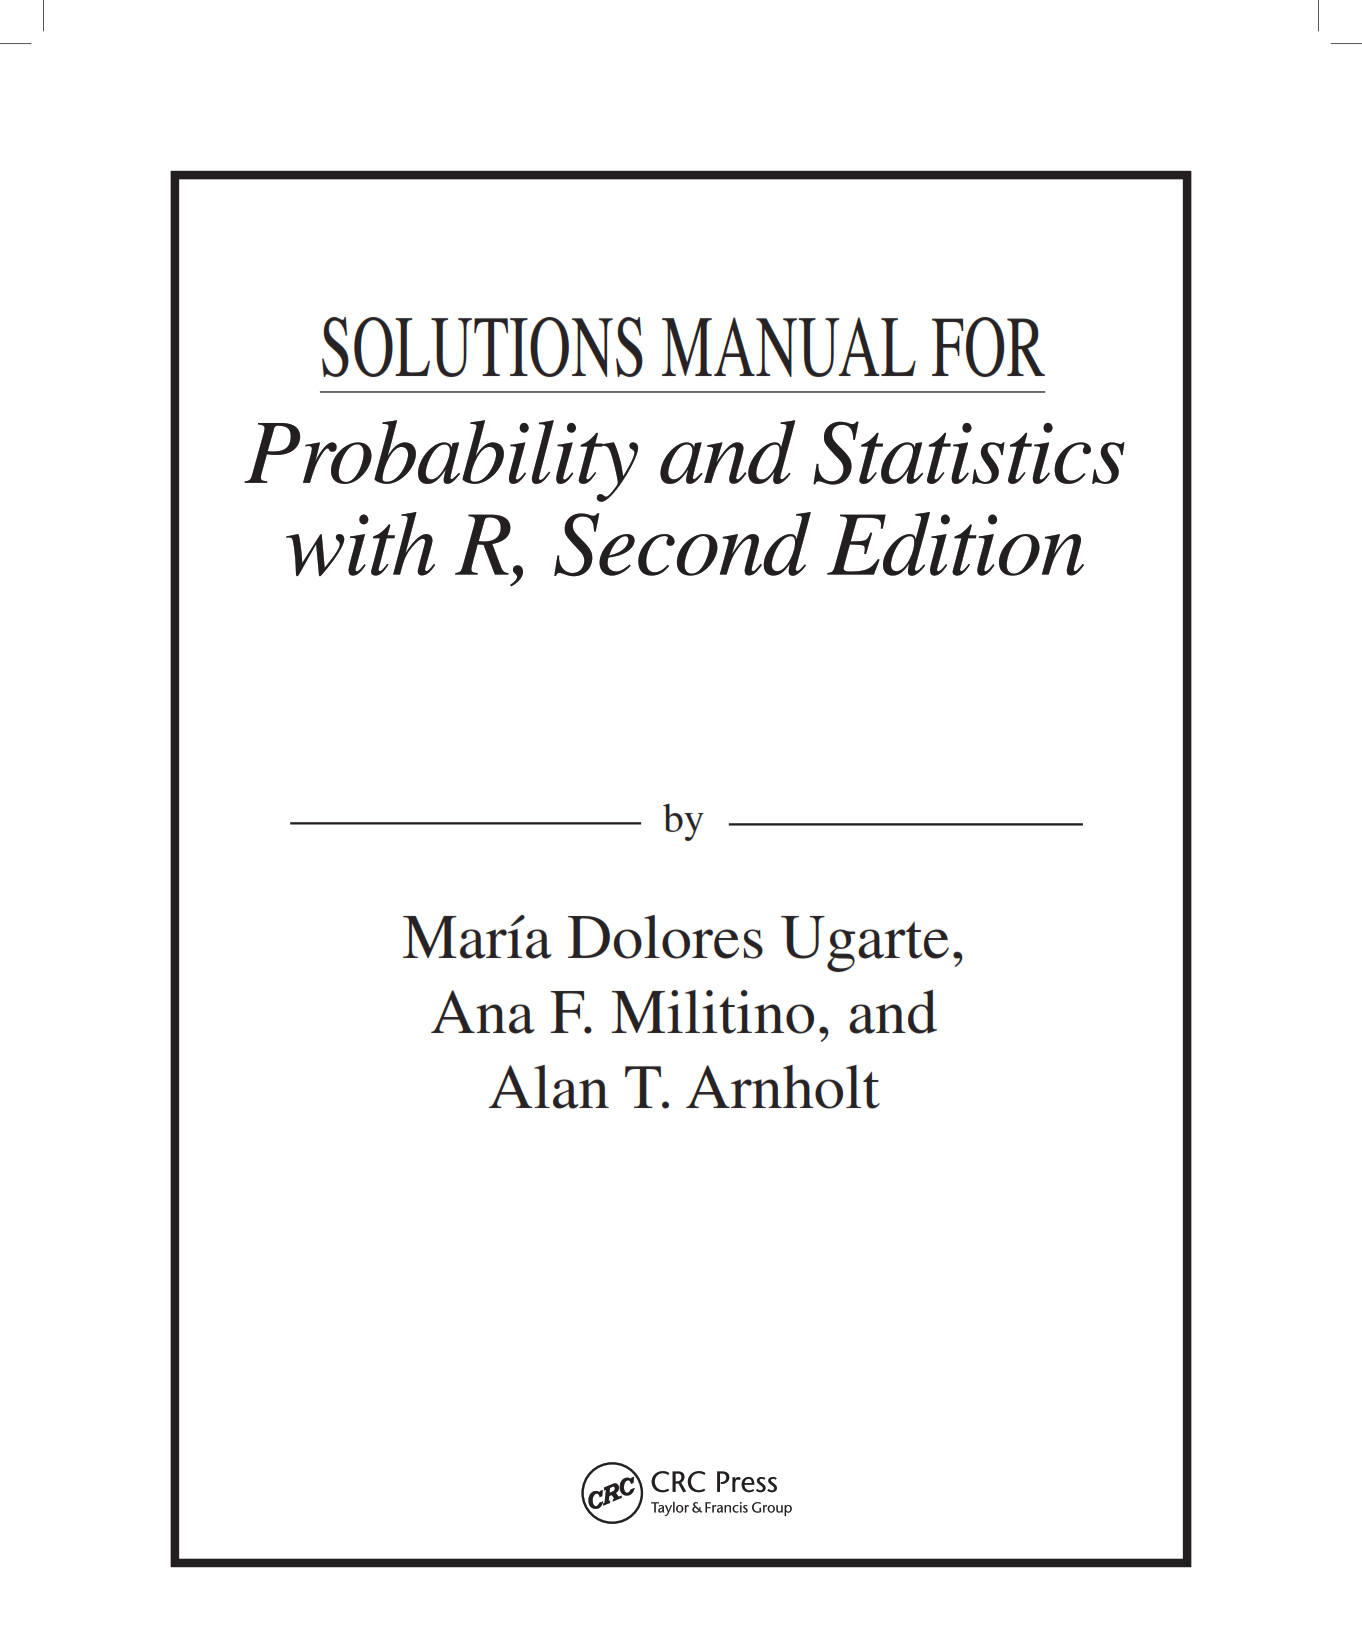 download free probability and statistics with R Maria Dolores Ugarte , Militino , Arnholt  2nd edition solutions manual pdf | Gioumeh solution